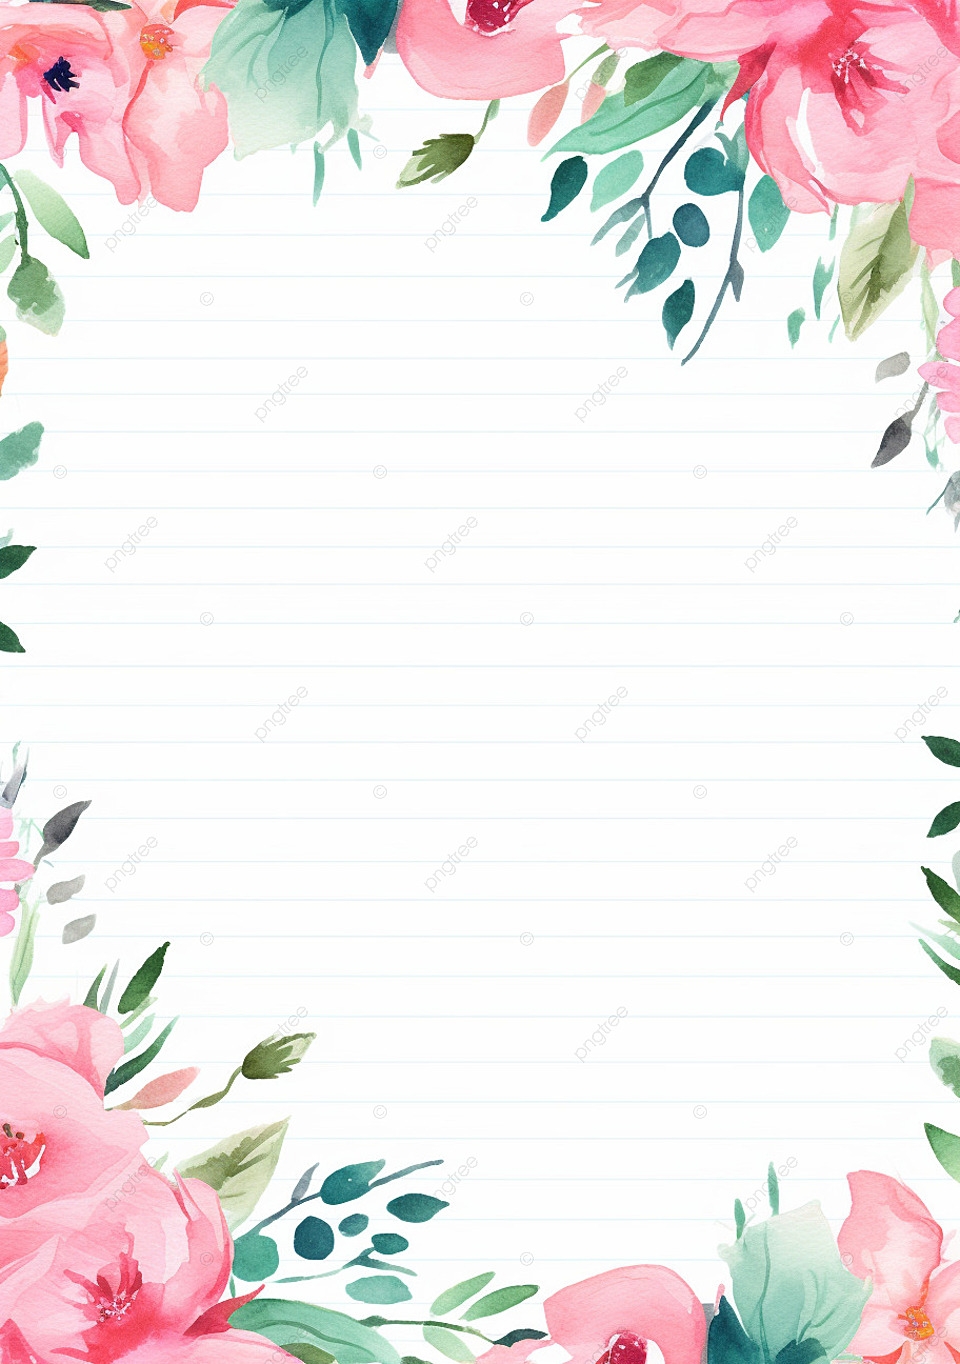 Page Template Printable Floral Background For Notes And Cards Wallpaper Image For Free Download Pngtree - Free Printable Background Pages